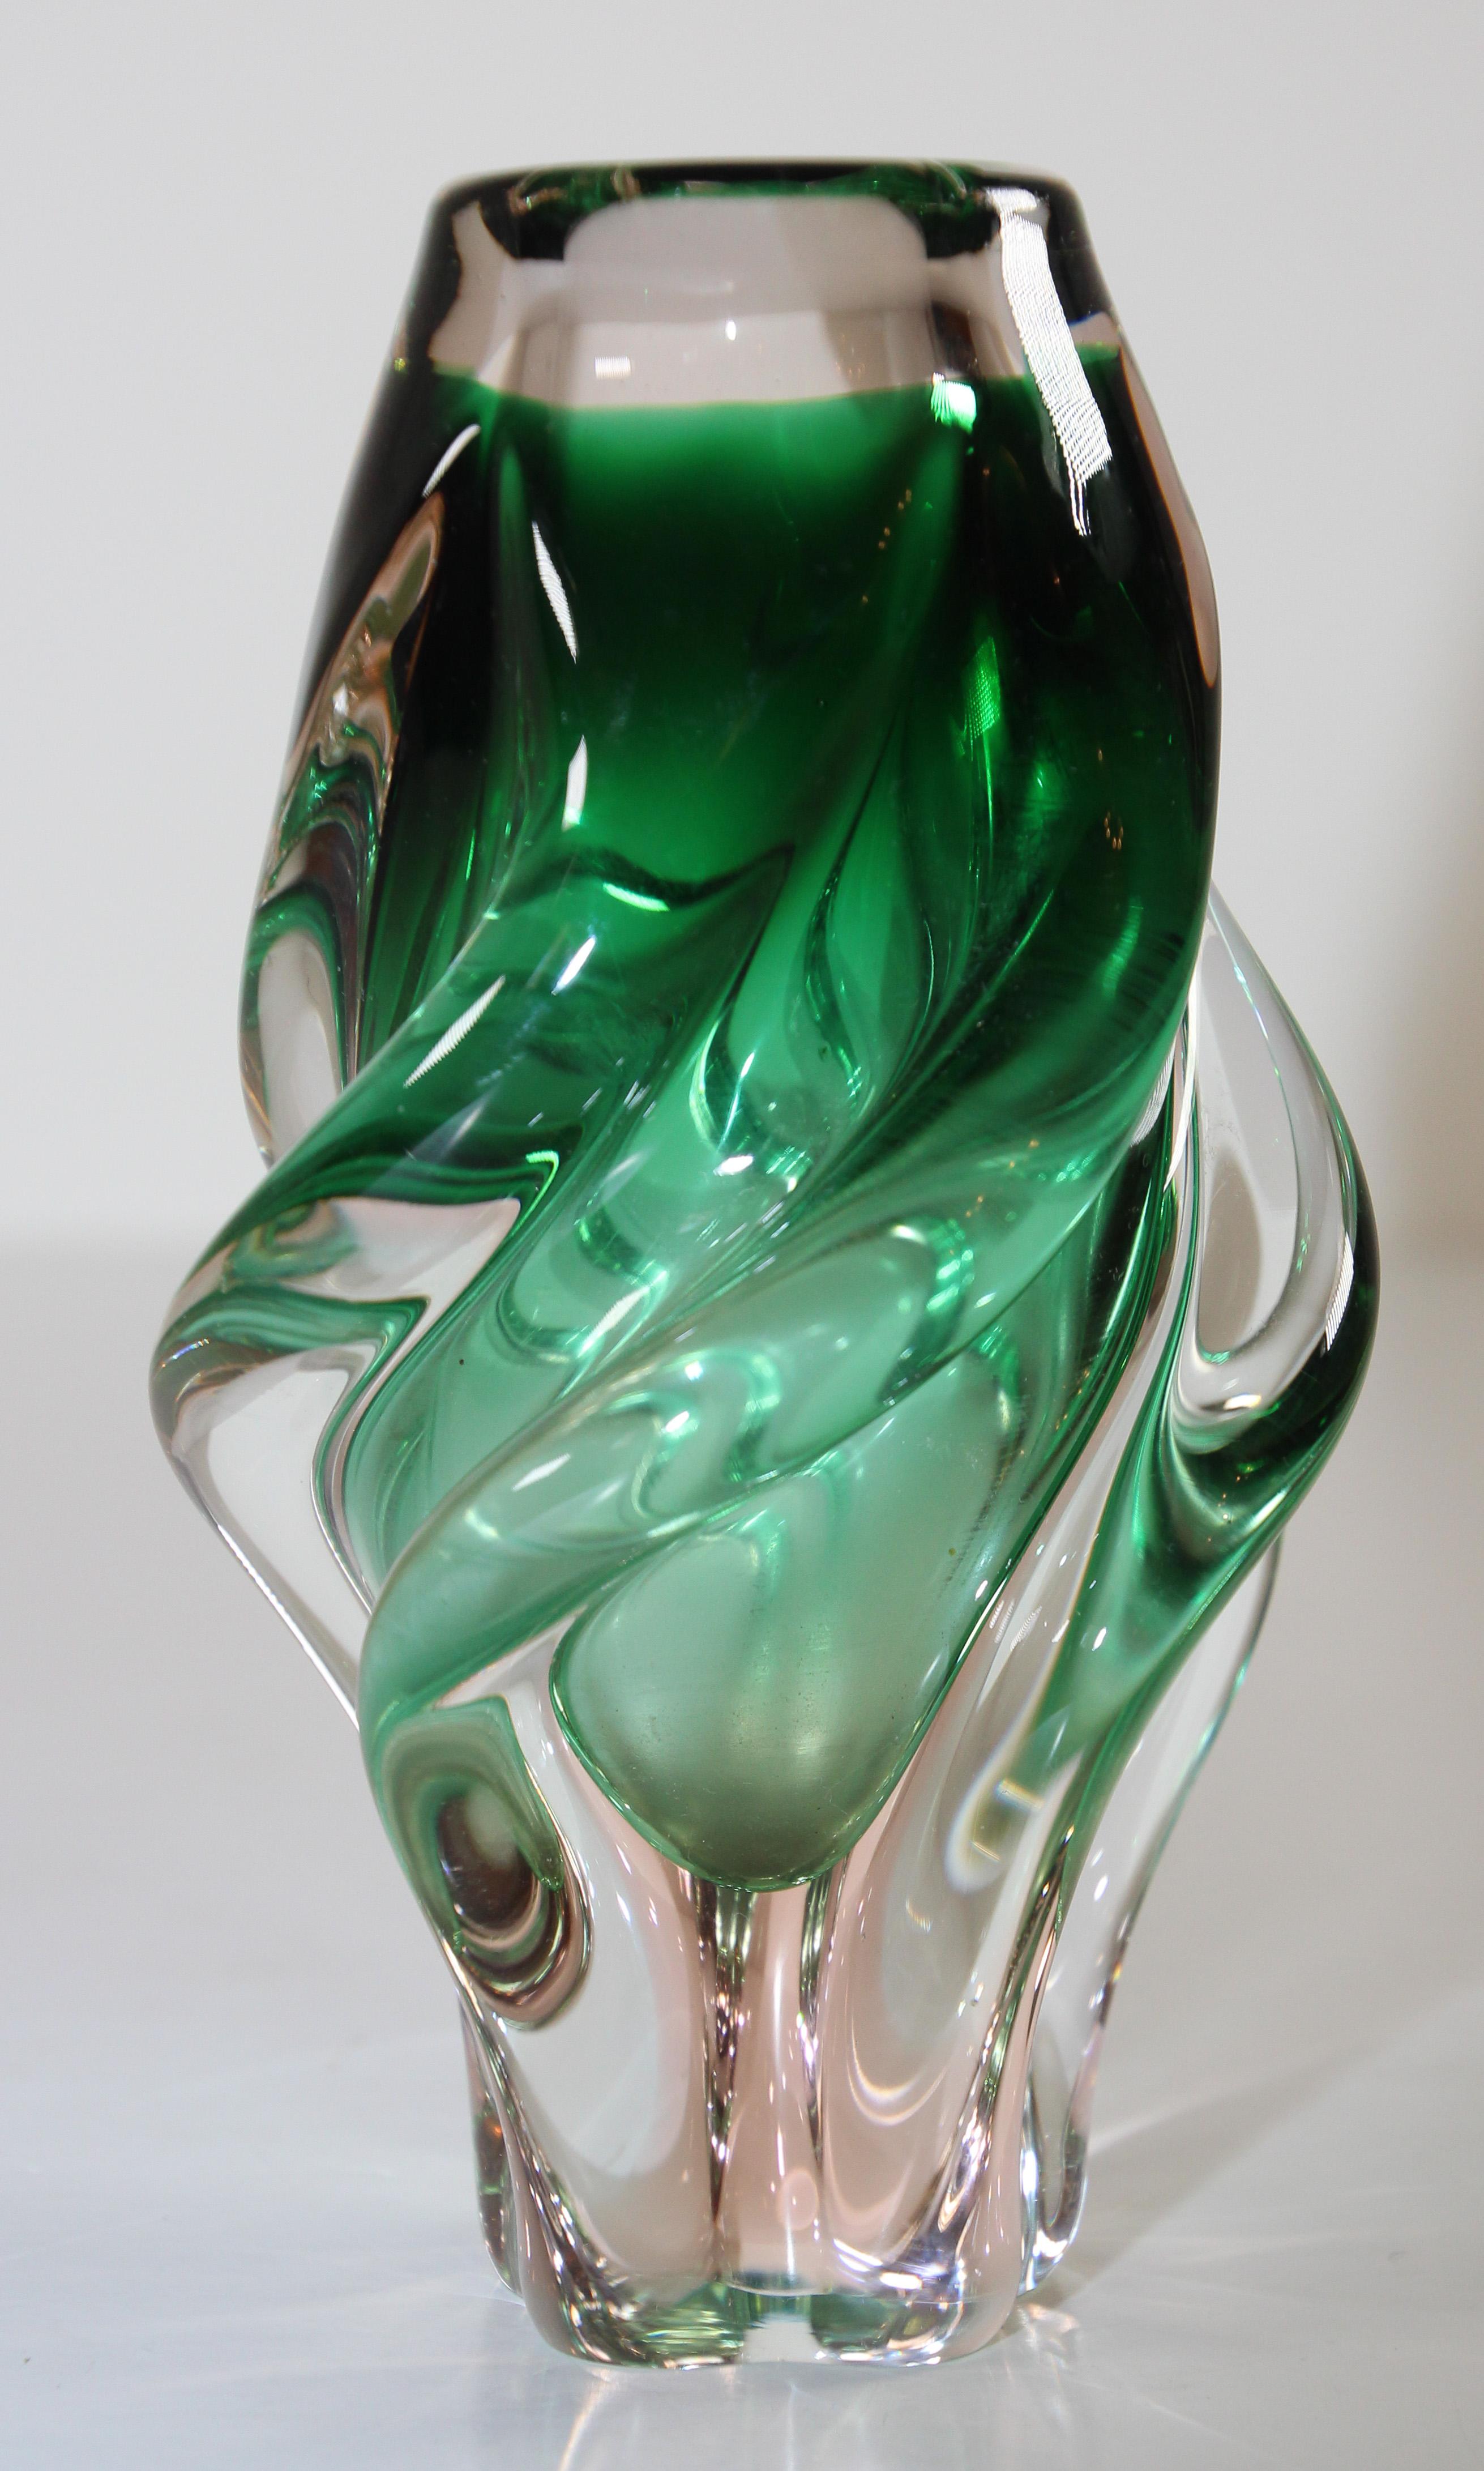 Murano style handblown art glass vase in green twisted shape.
The talented artisan recover traditional glass blowing techniques from Murano, Italy, using pigments to give this vase hues of green.
This heavy handcrafted art glass vase features a